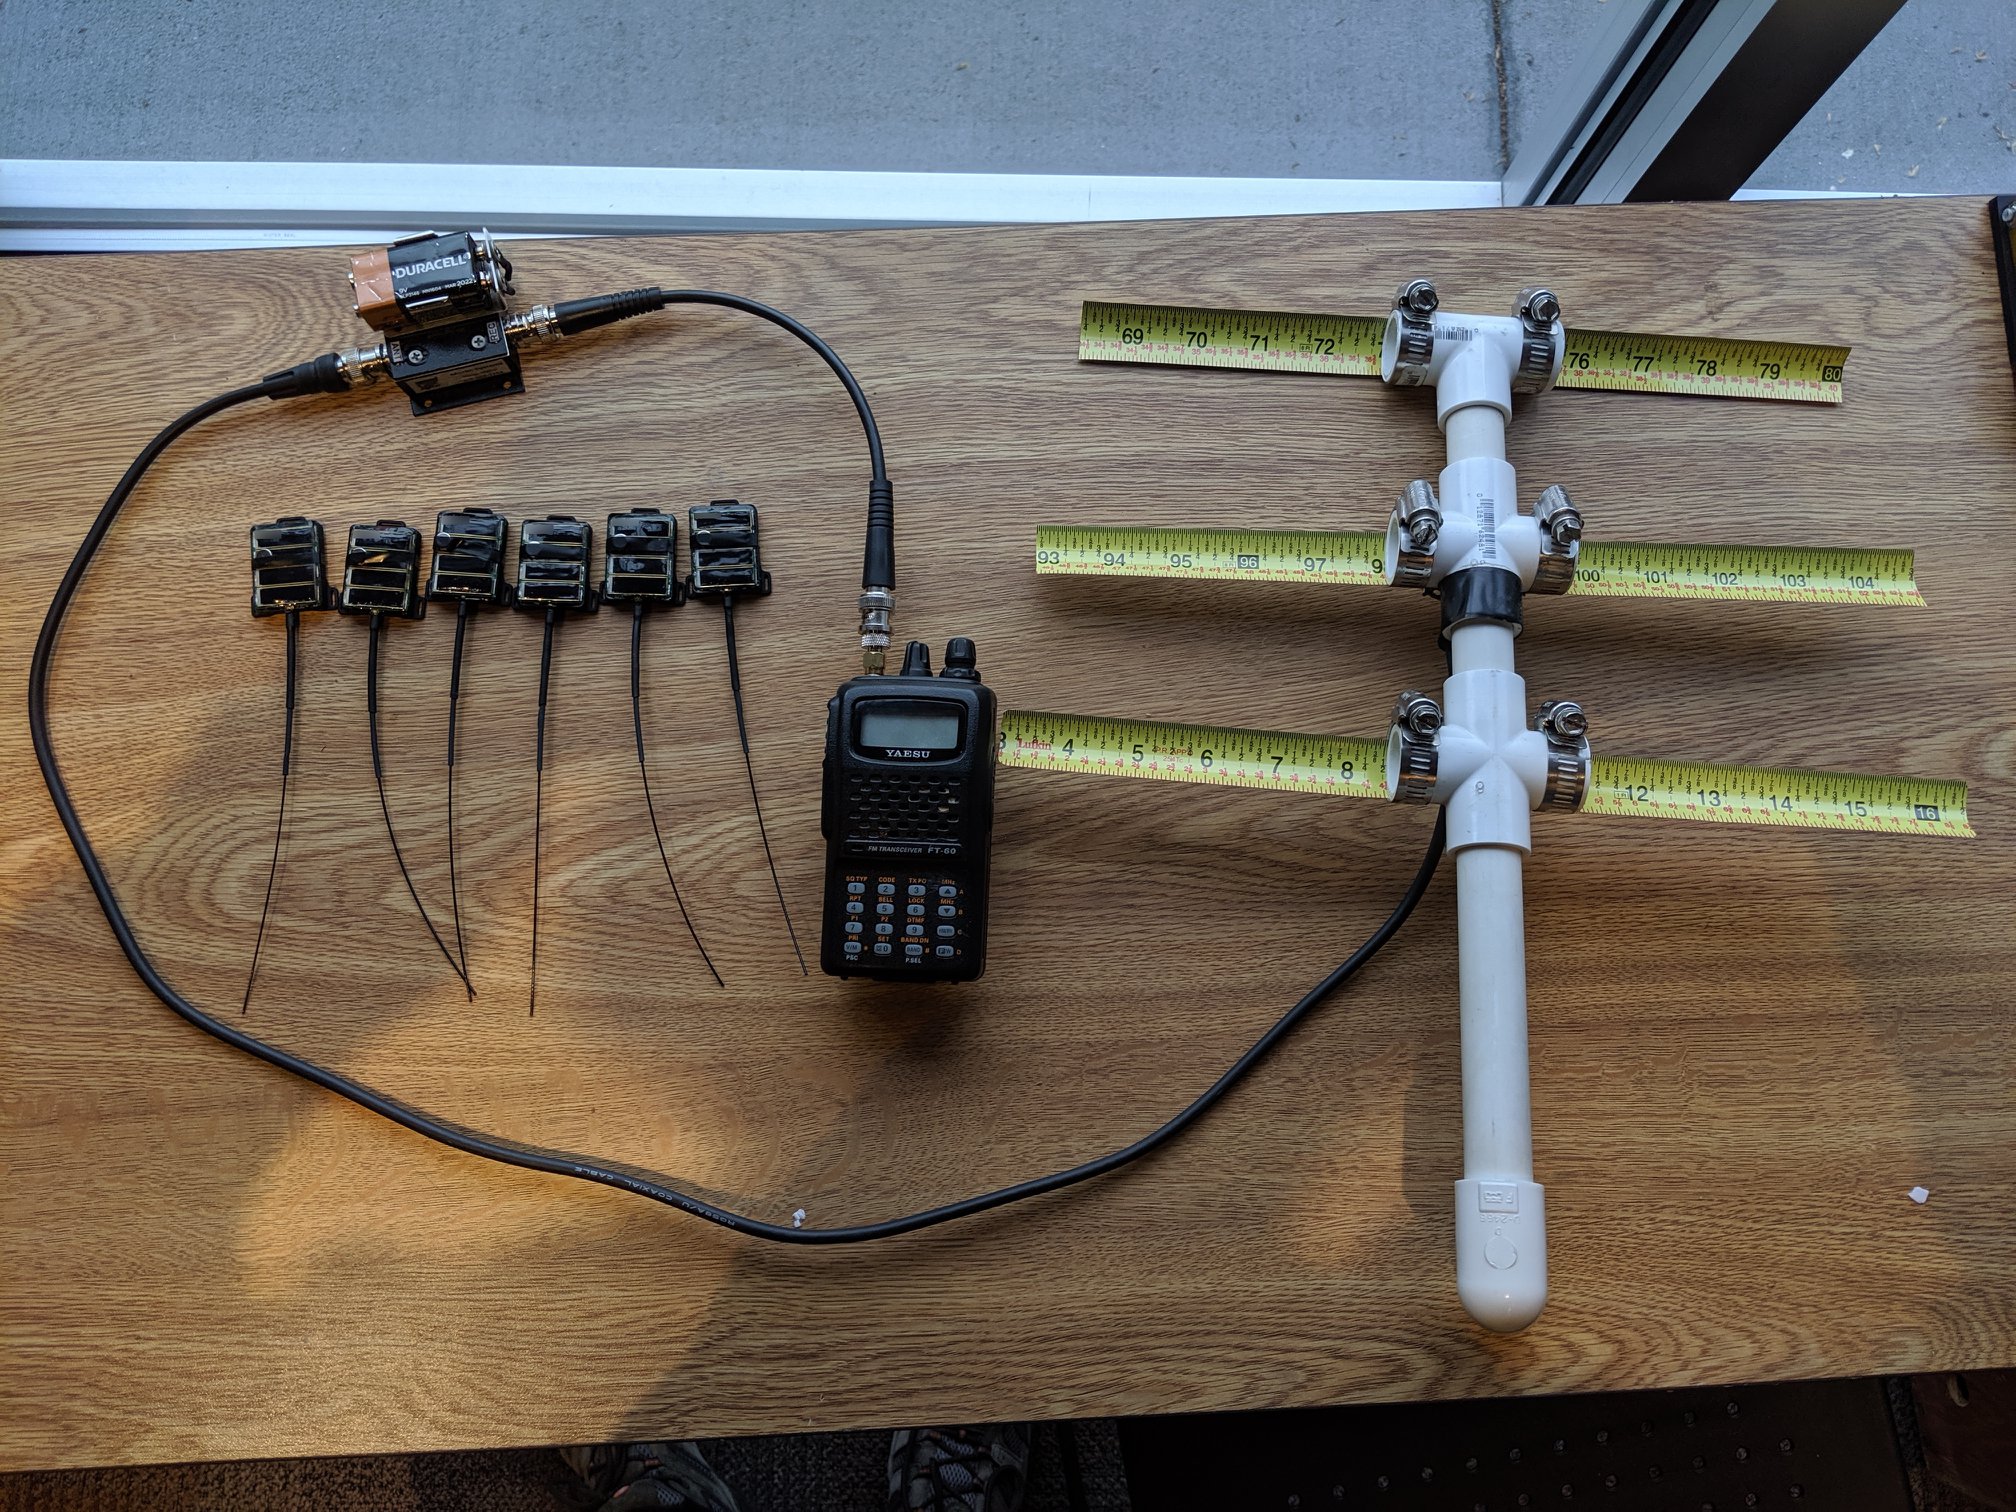 six small transmitters with antennas sit on a desk with a larger t-shaped receiver antenna